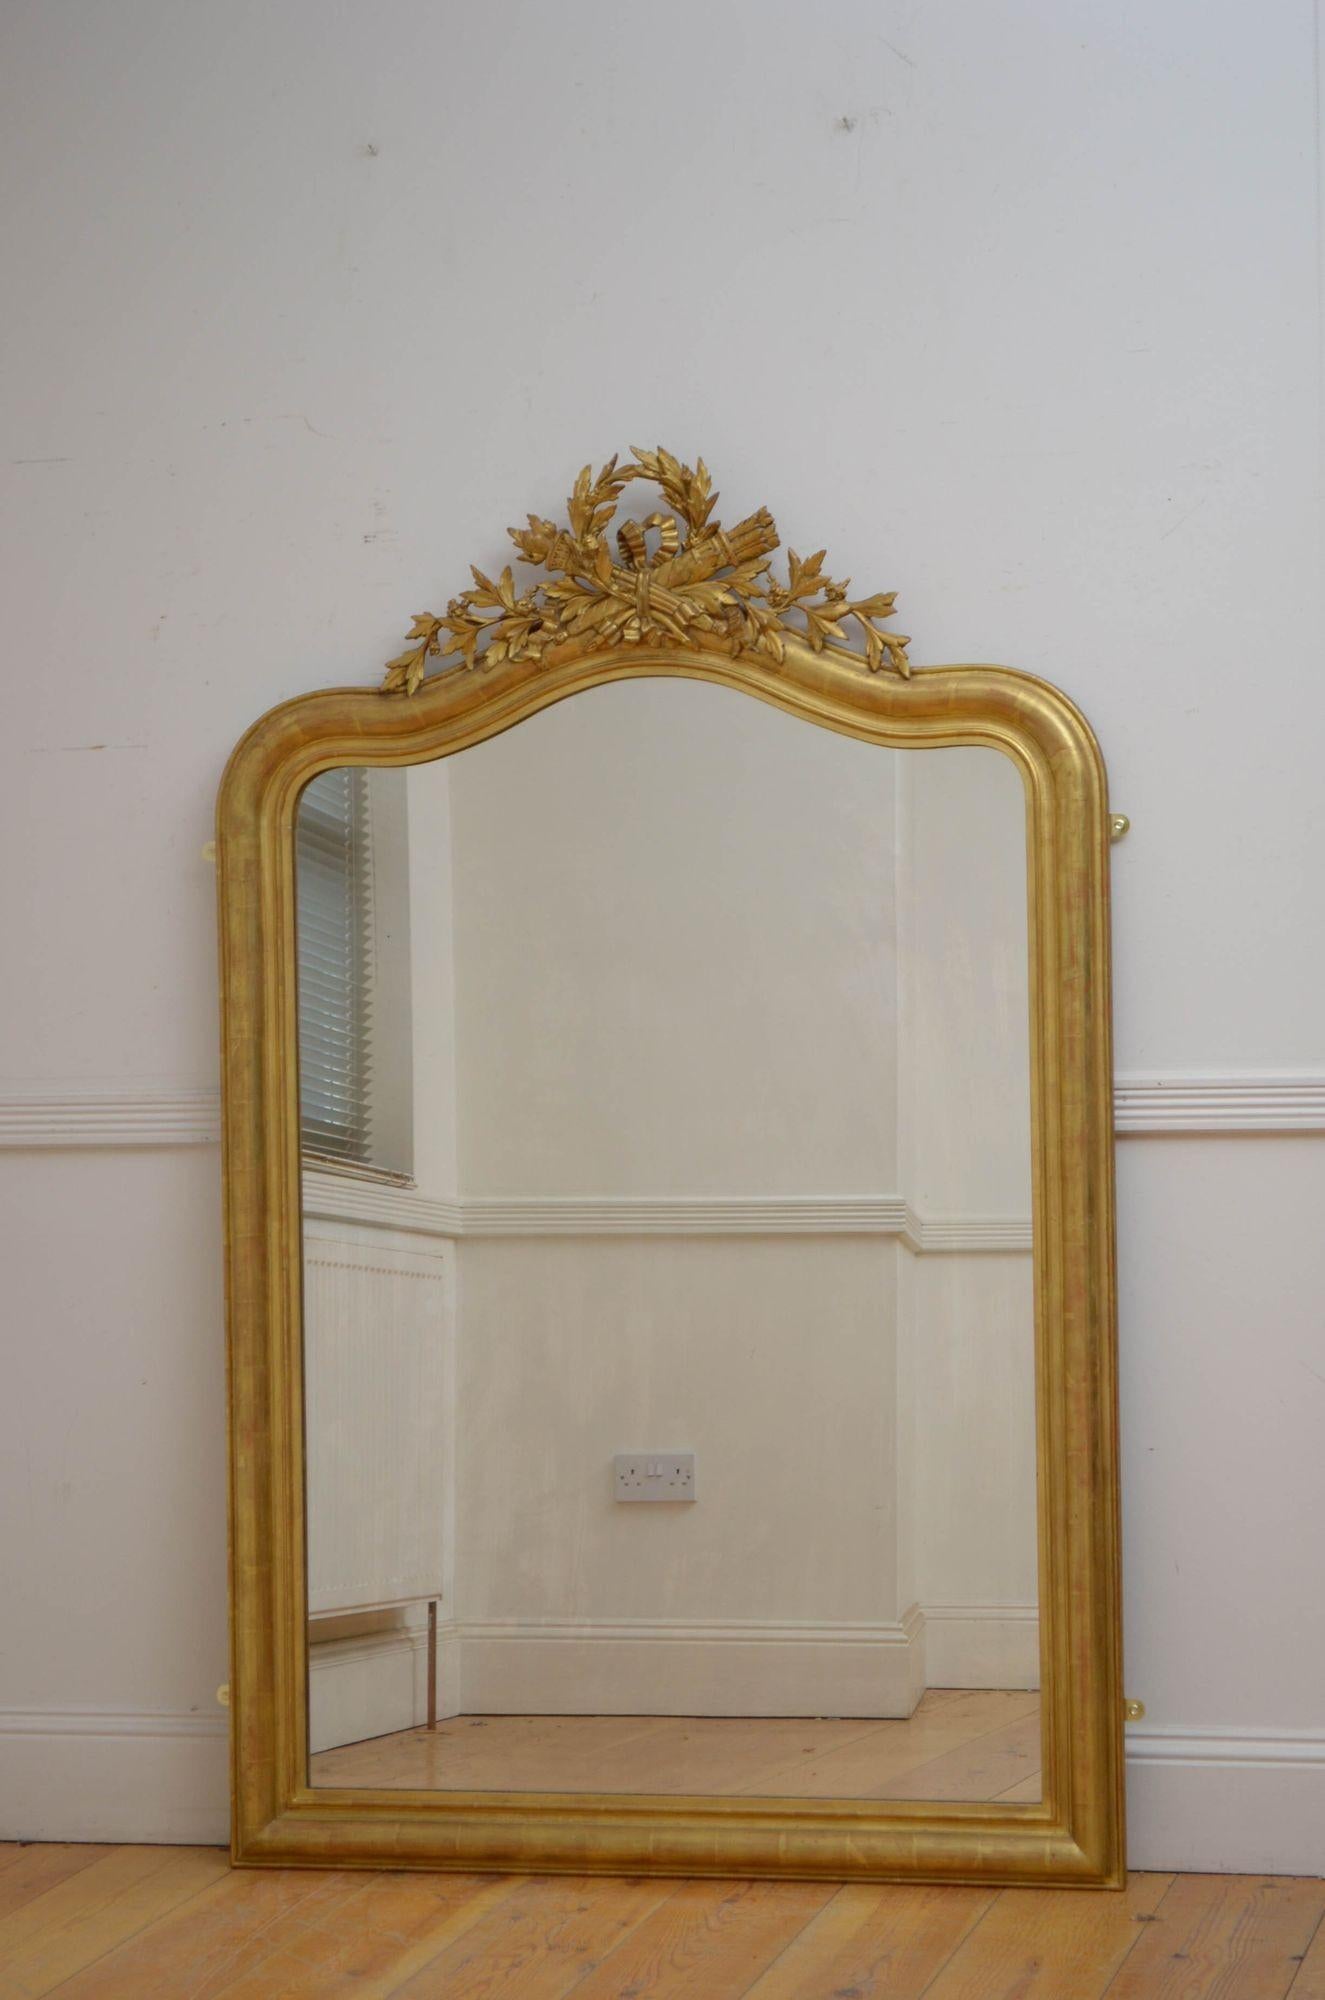 Sn5478 Fine antique gilded wall mirror, having original glass with minor imperfections in moulded frame with floral crest to the top centre. This antique giltwood mirror retains its original glass, original gilt and original backboards, all in home